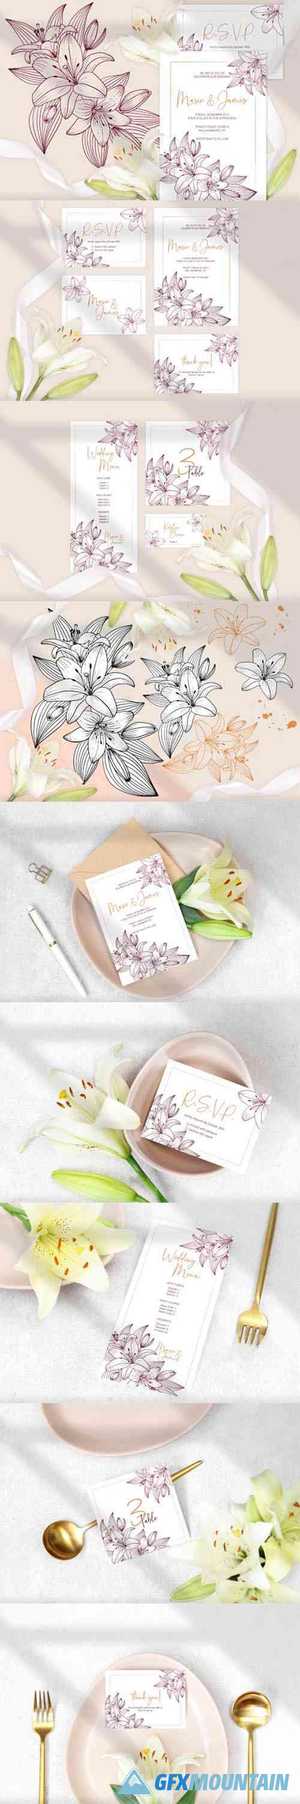 Lilies Wedding Invitation Template Cards 2769493